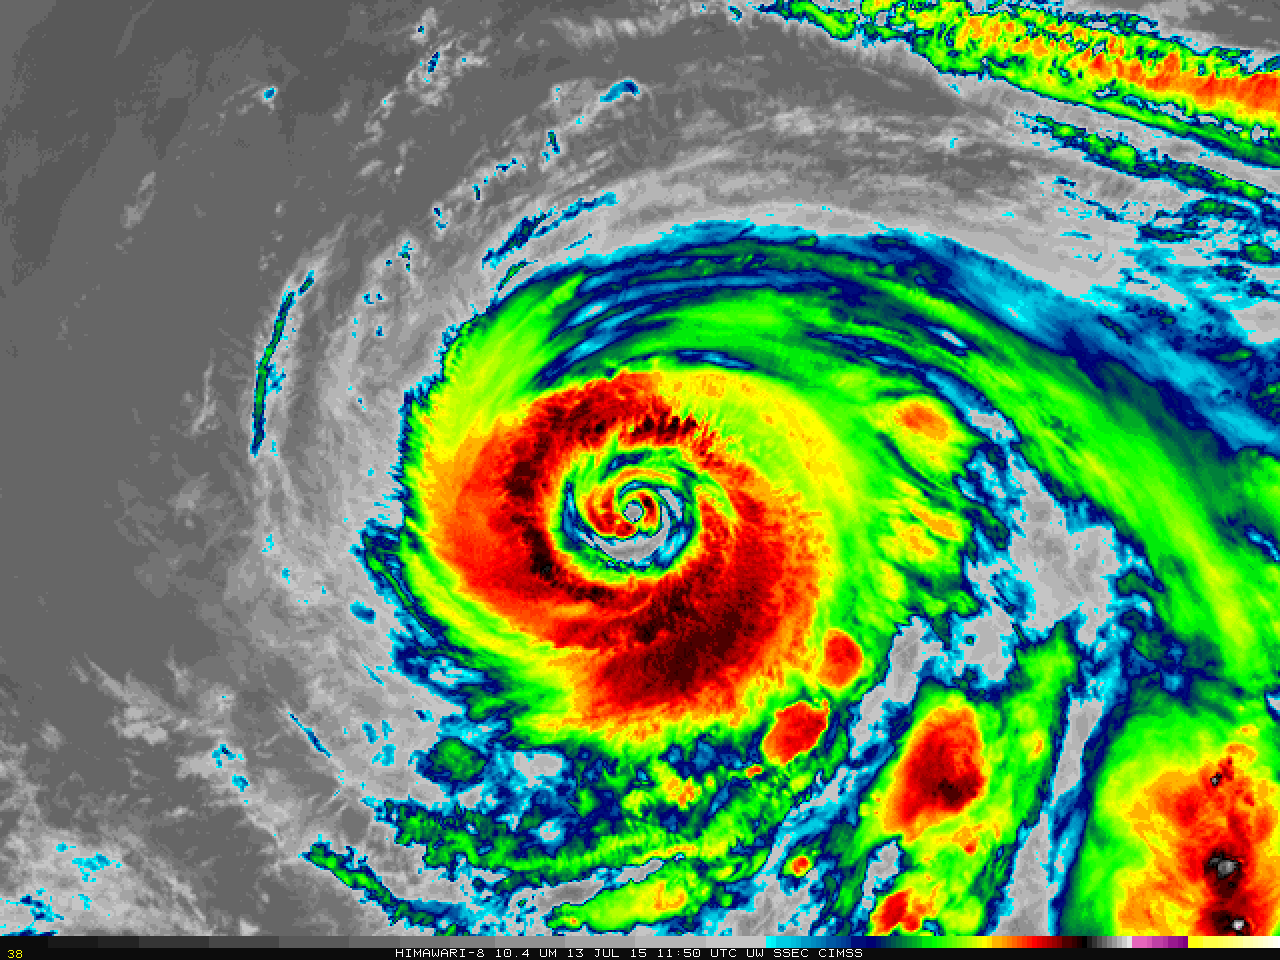 Himawari-8 10.35 µm infrared imagery, 0540-1540 UTC on 13 July 2015 (Click to animate)